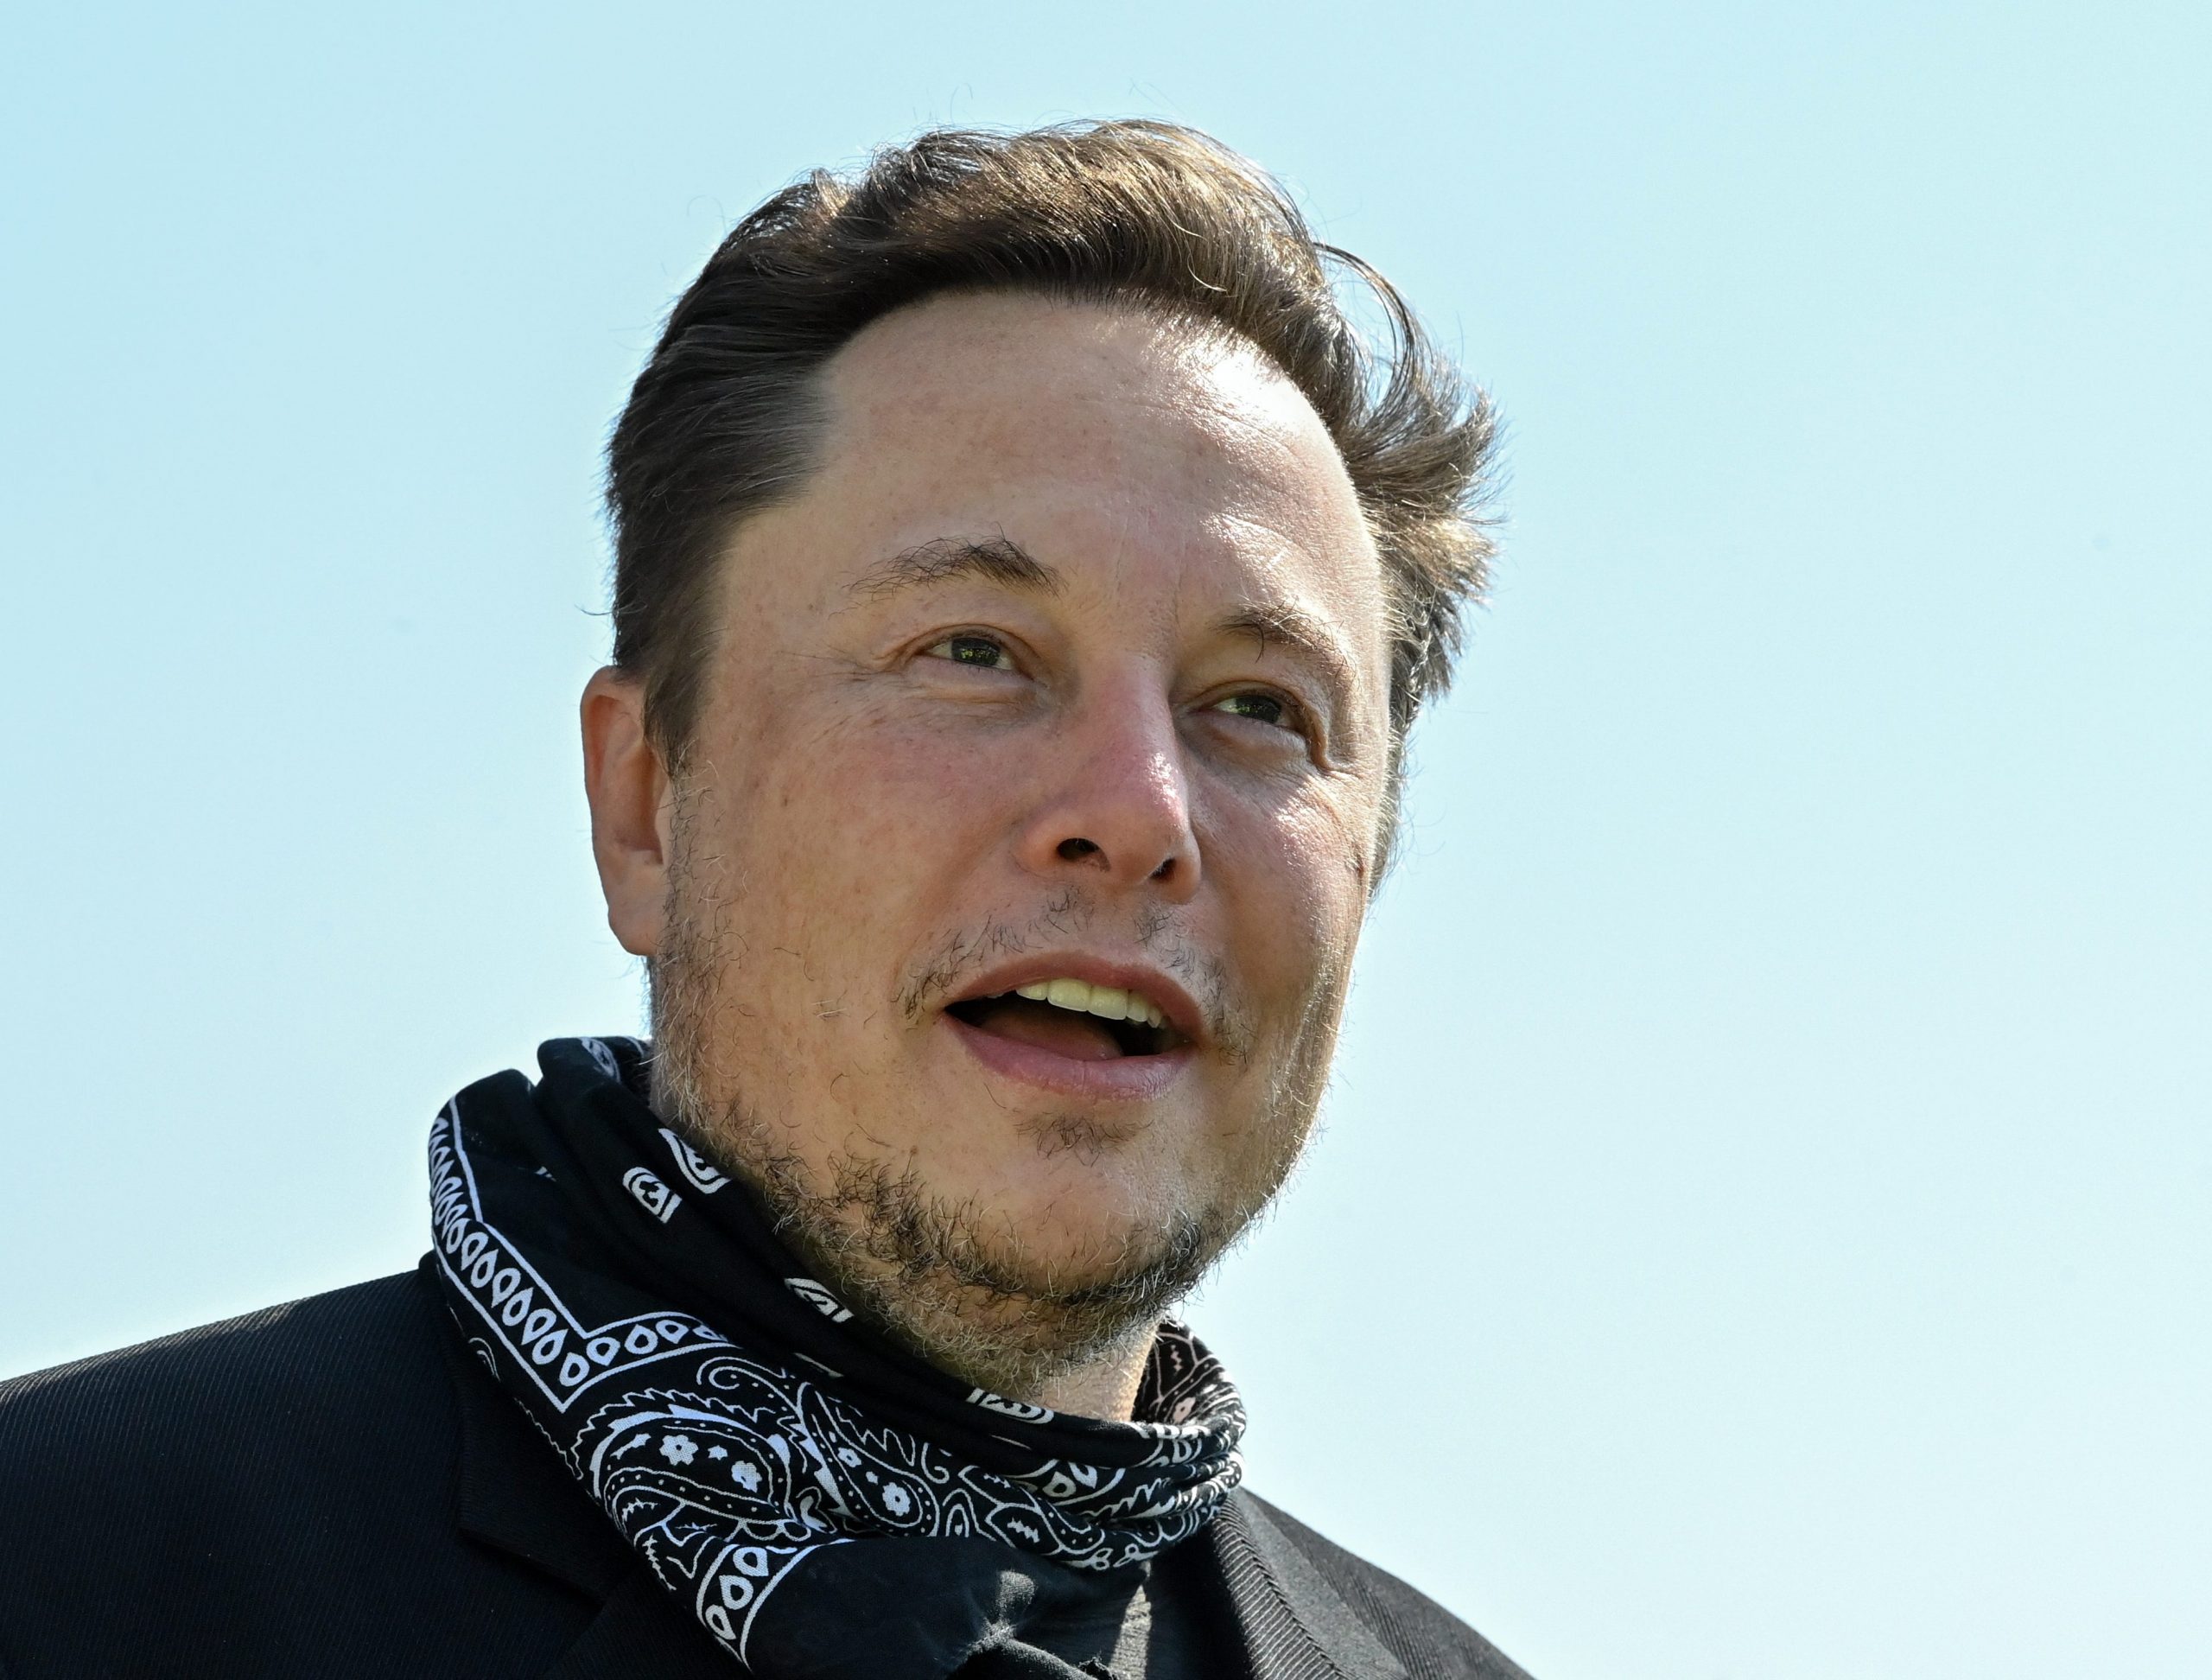 Tesla CEO Elon Musk wears a black and white bandana around his neck in front a light blue sky.